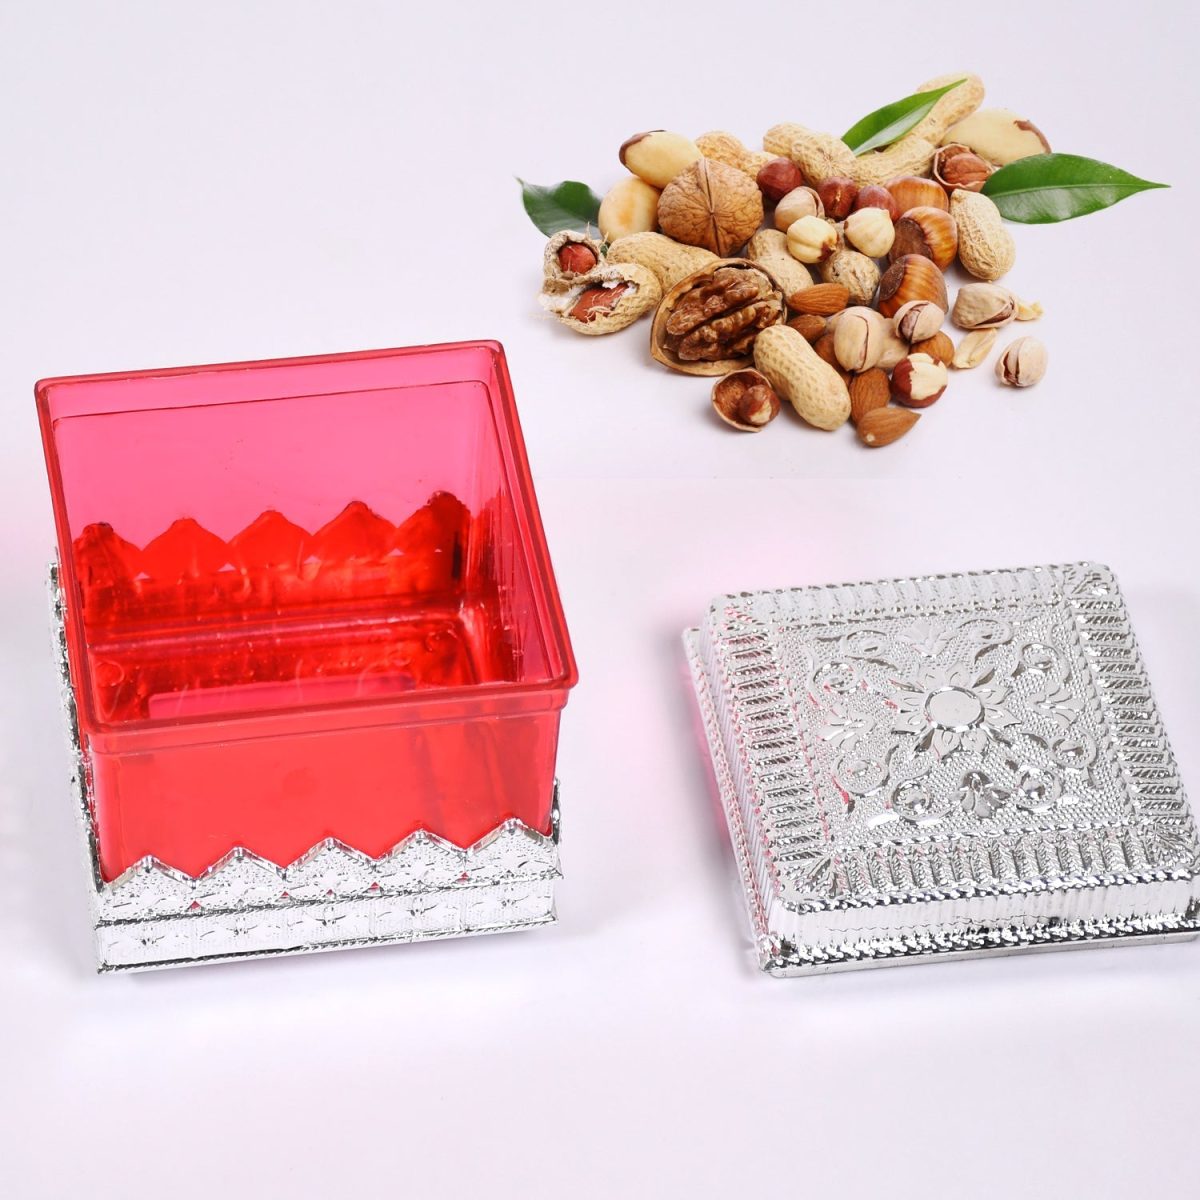 7129 RUBY DRYFRUIT STORAGE CONTAINER  ATTRACTIVE DESIGN BOX FOR HOME , GIFTING & KITCHEN USE